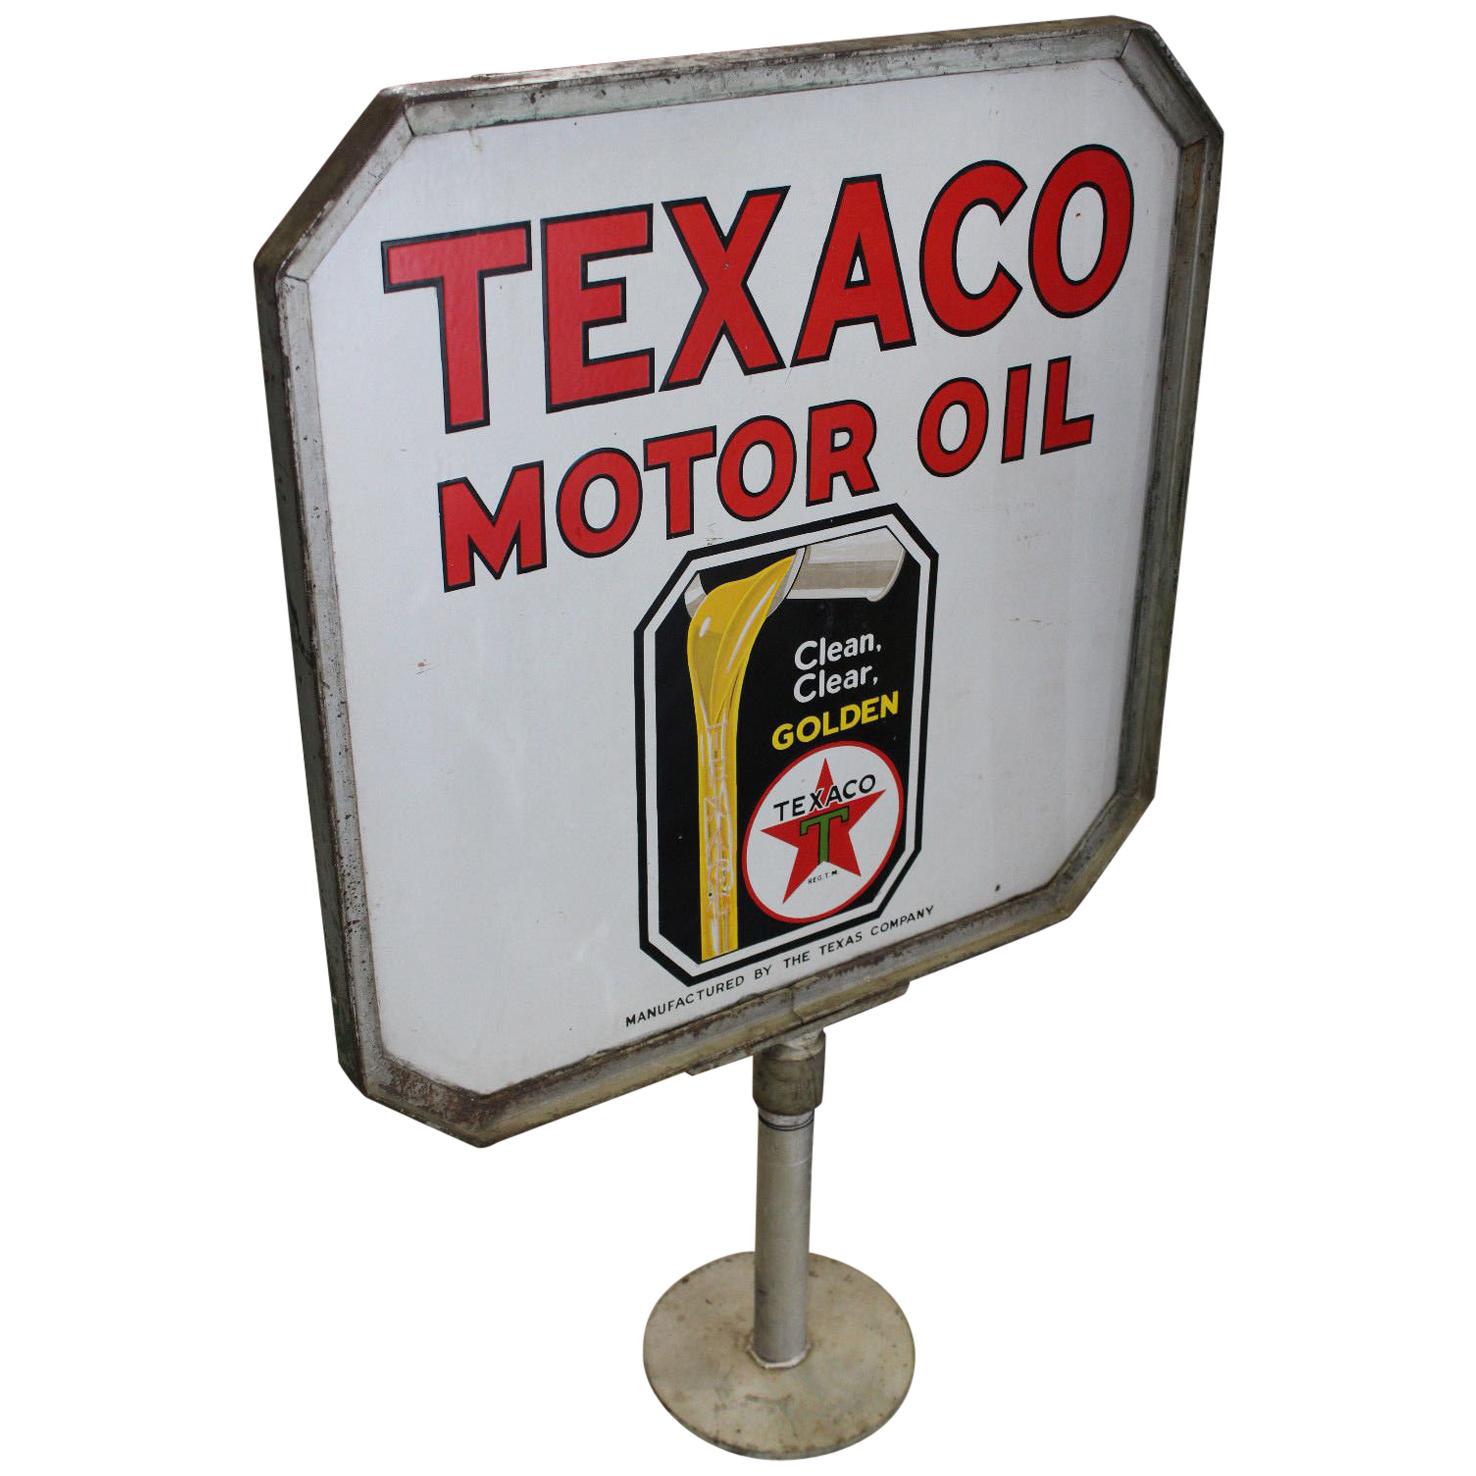 1930s Texaco Motor Oil Double-Sided Porcelain Curb Sign For Sale